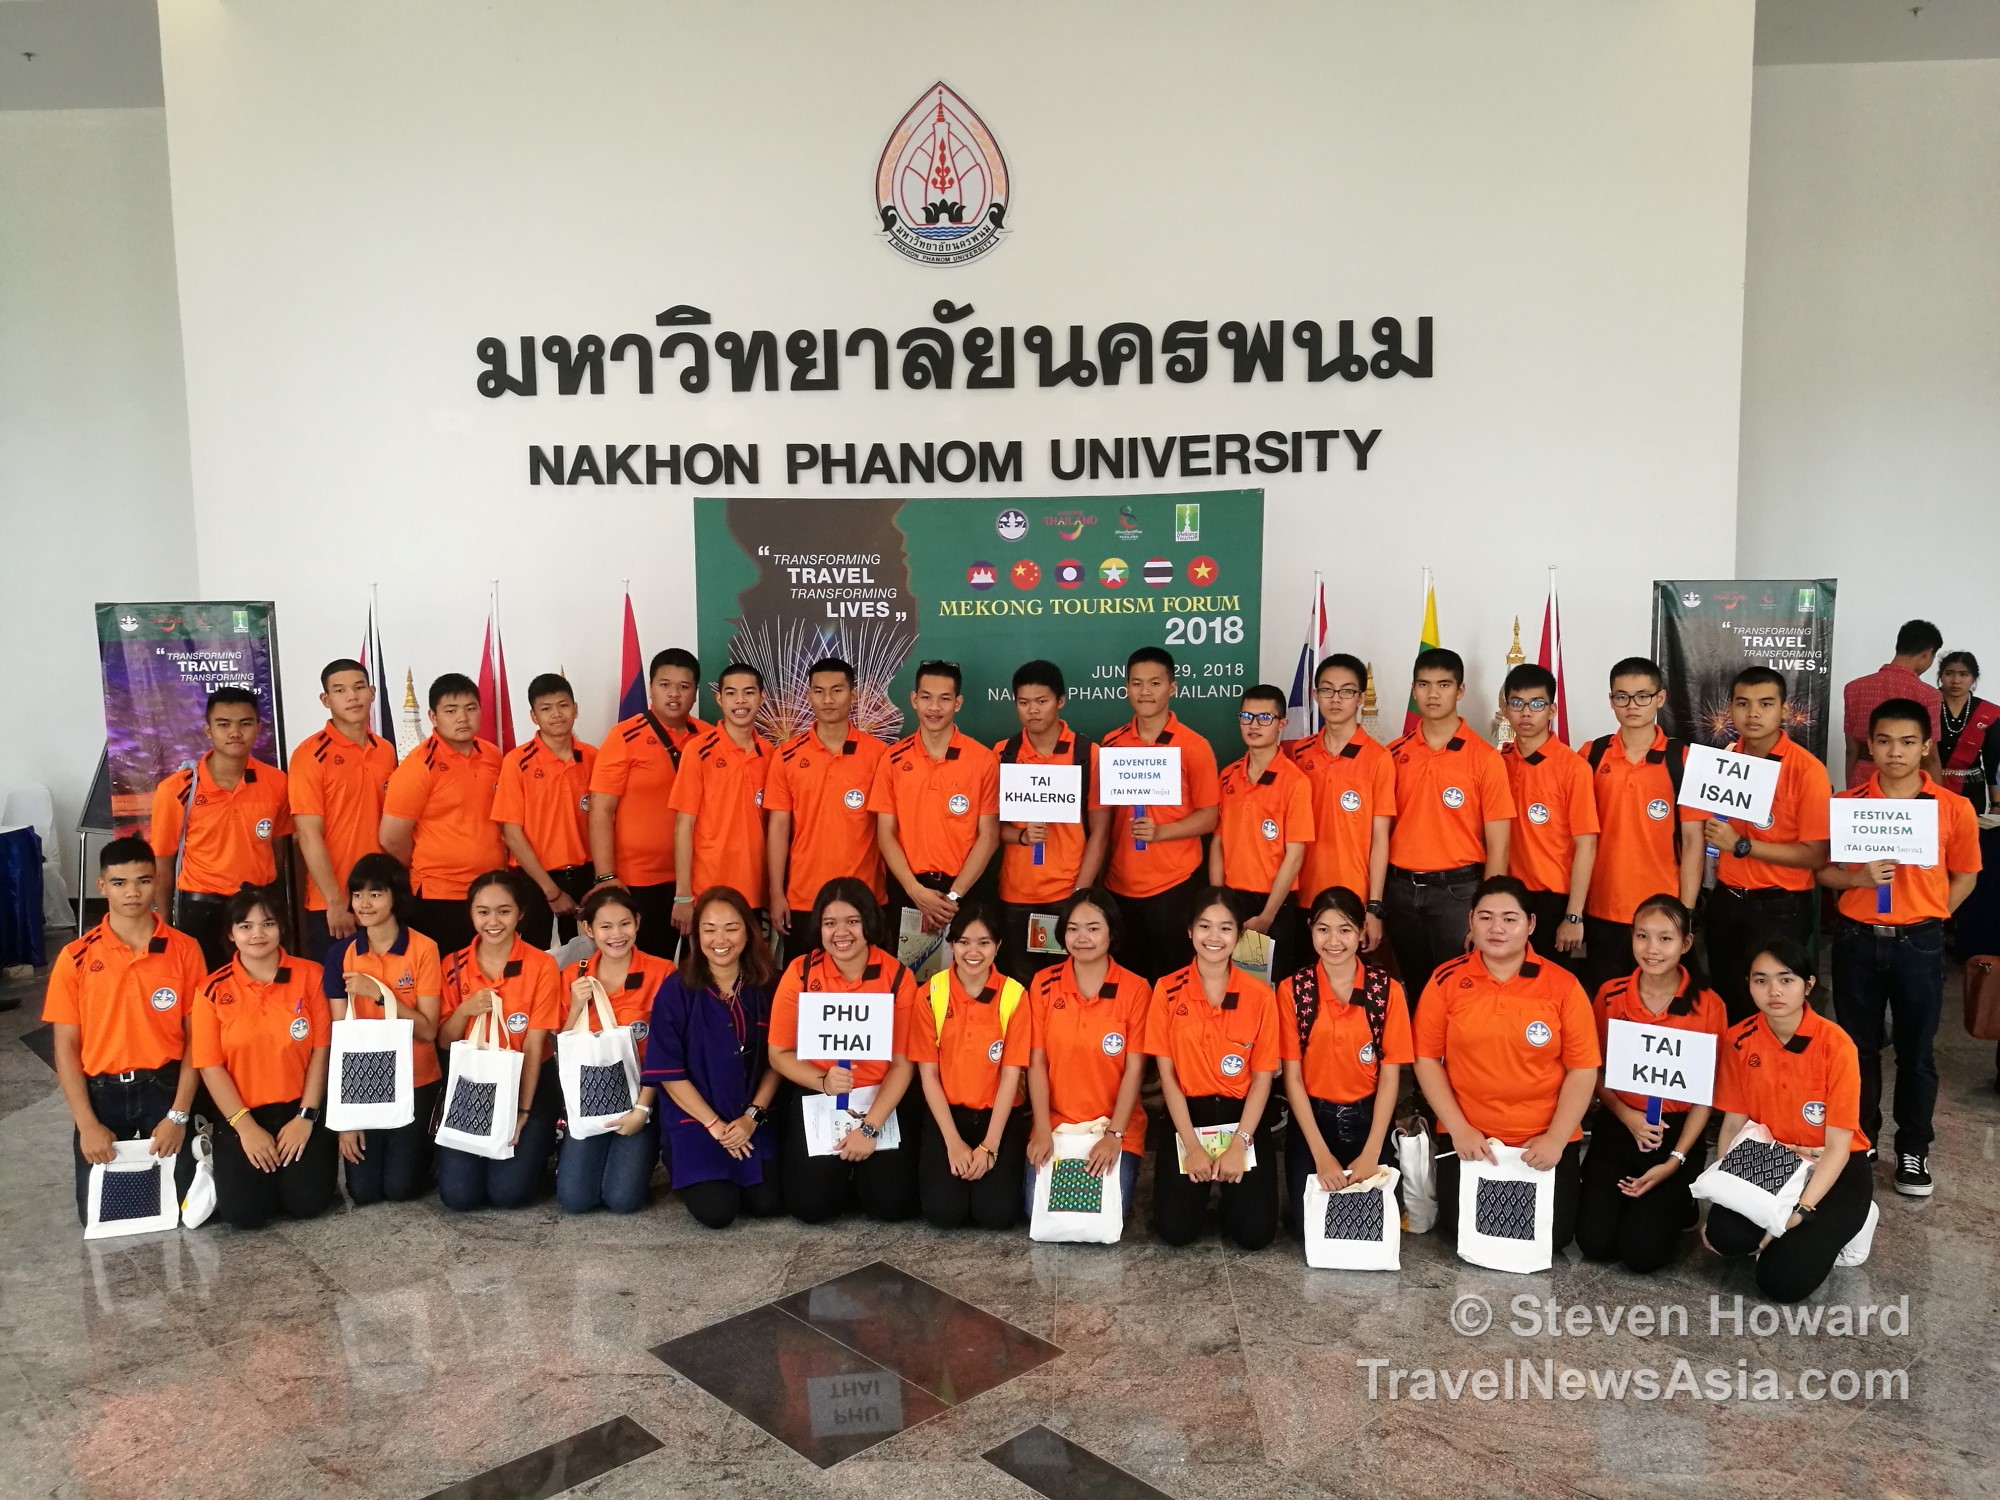 Pictures of Mekong Tourism Forum 2018 in Nakhon Phanom, Thailand